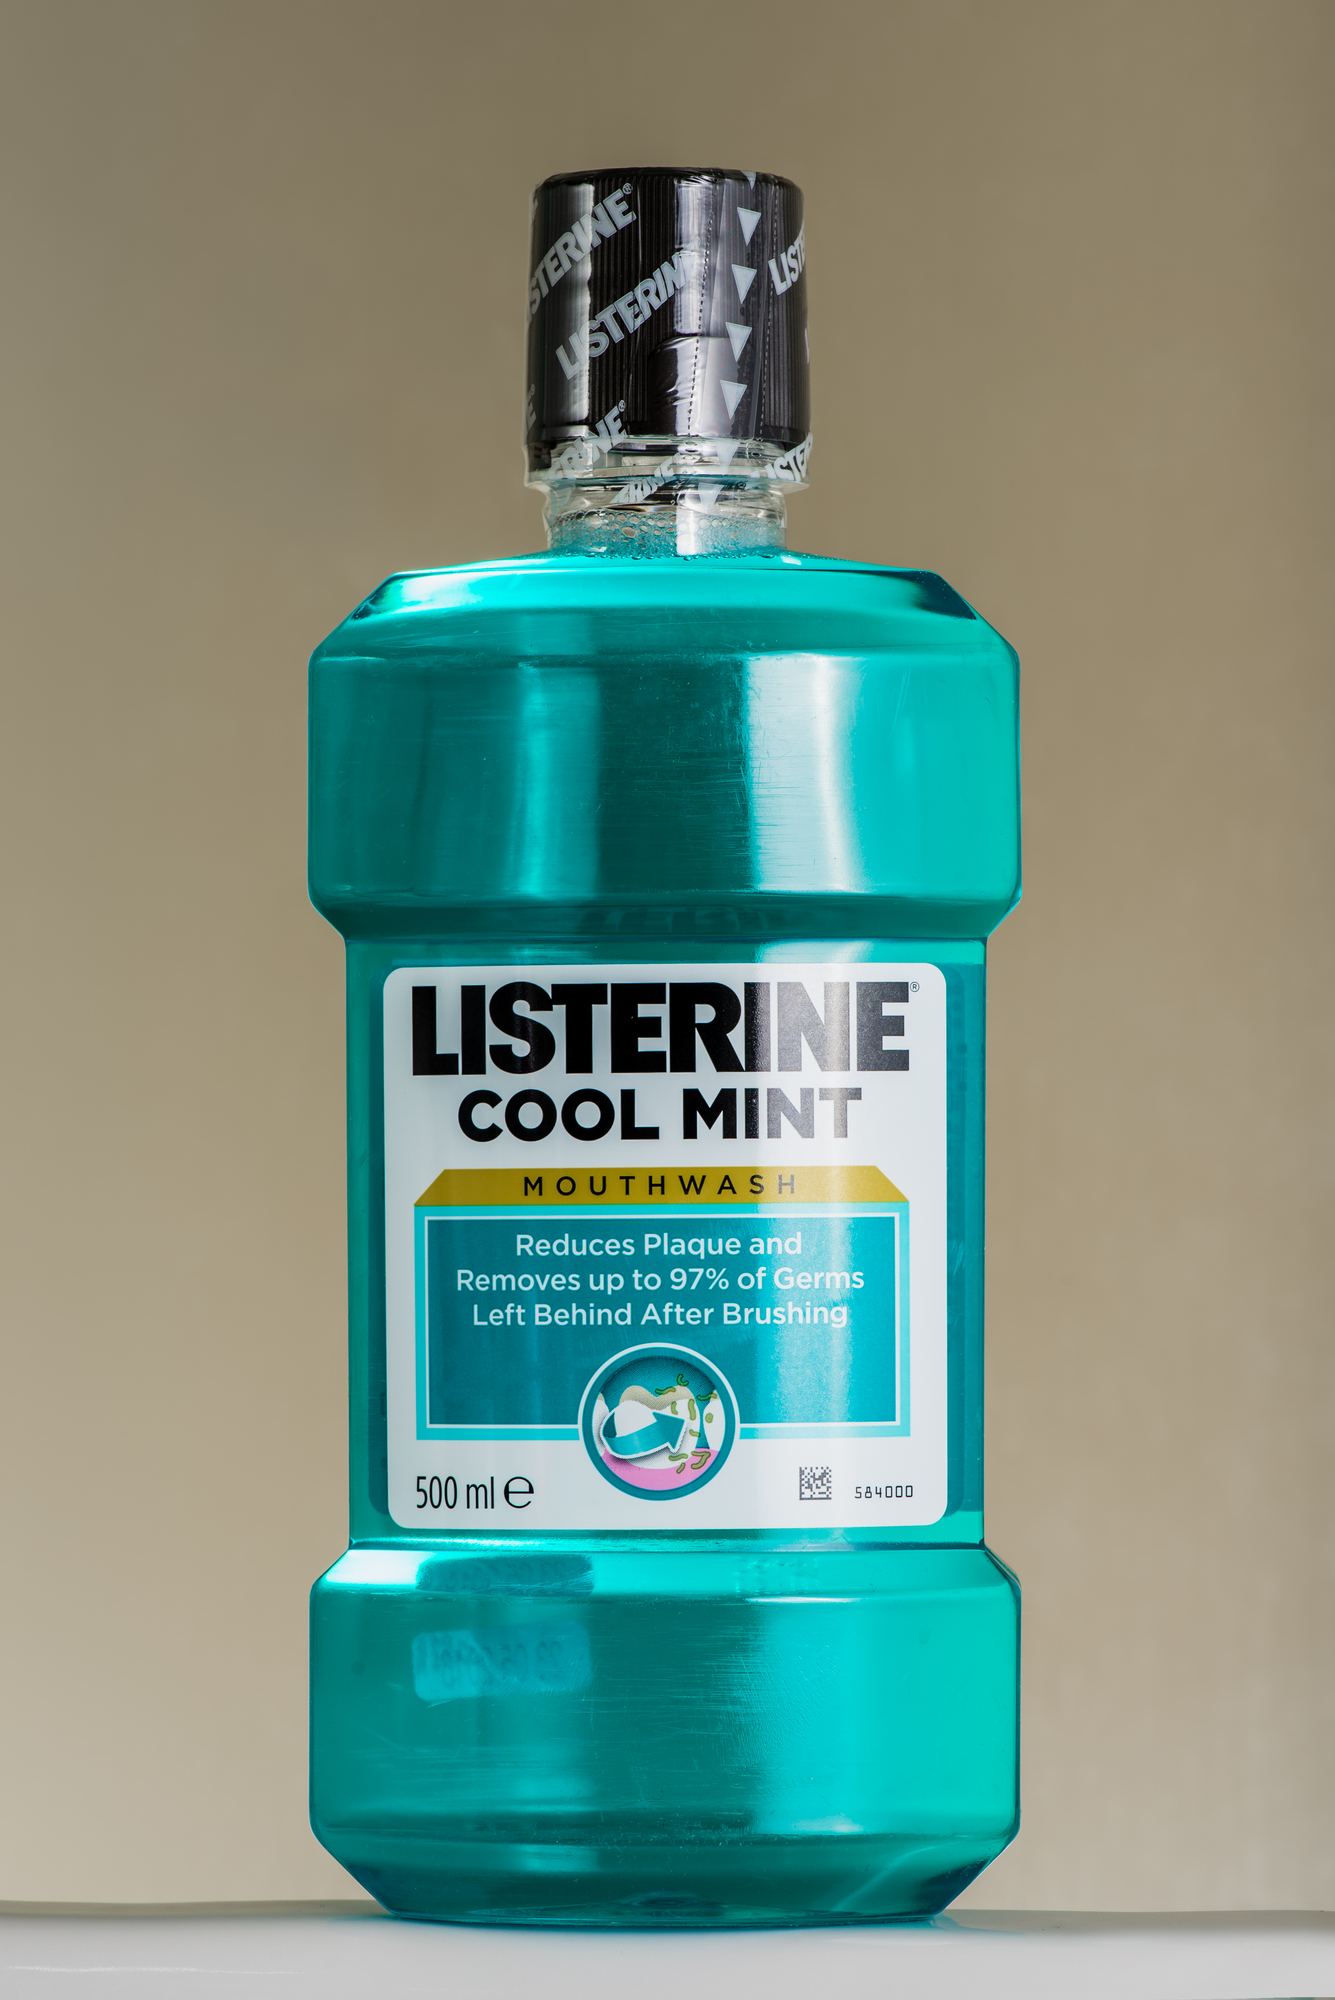 10 Clever Ways To Use Mouthwash Beyond Oral Health